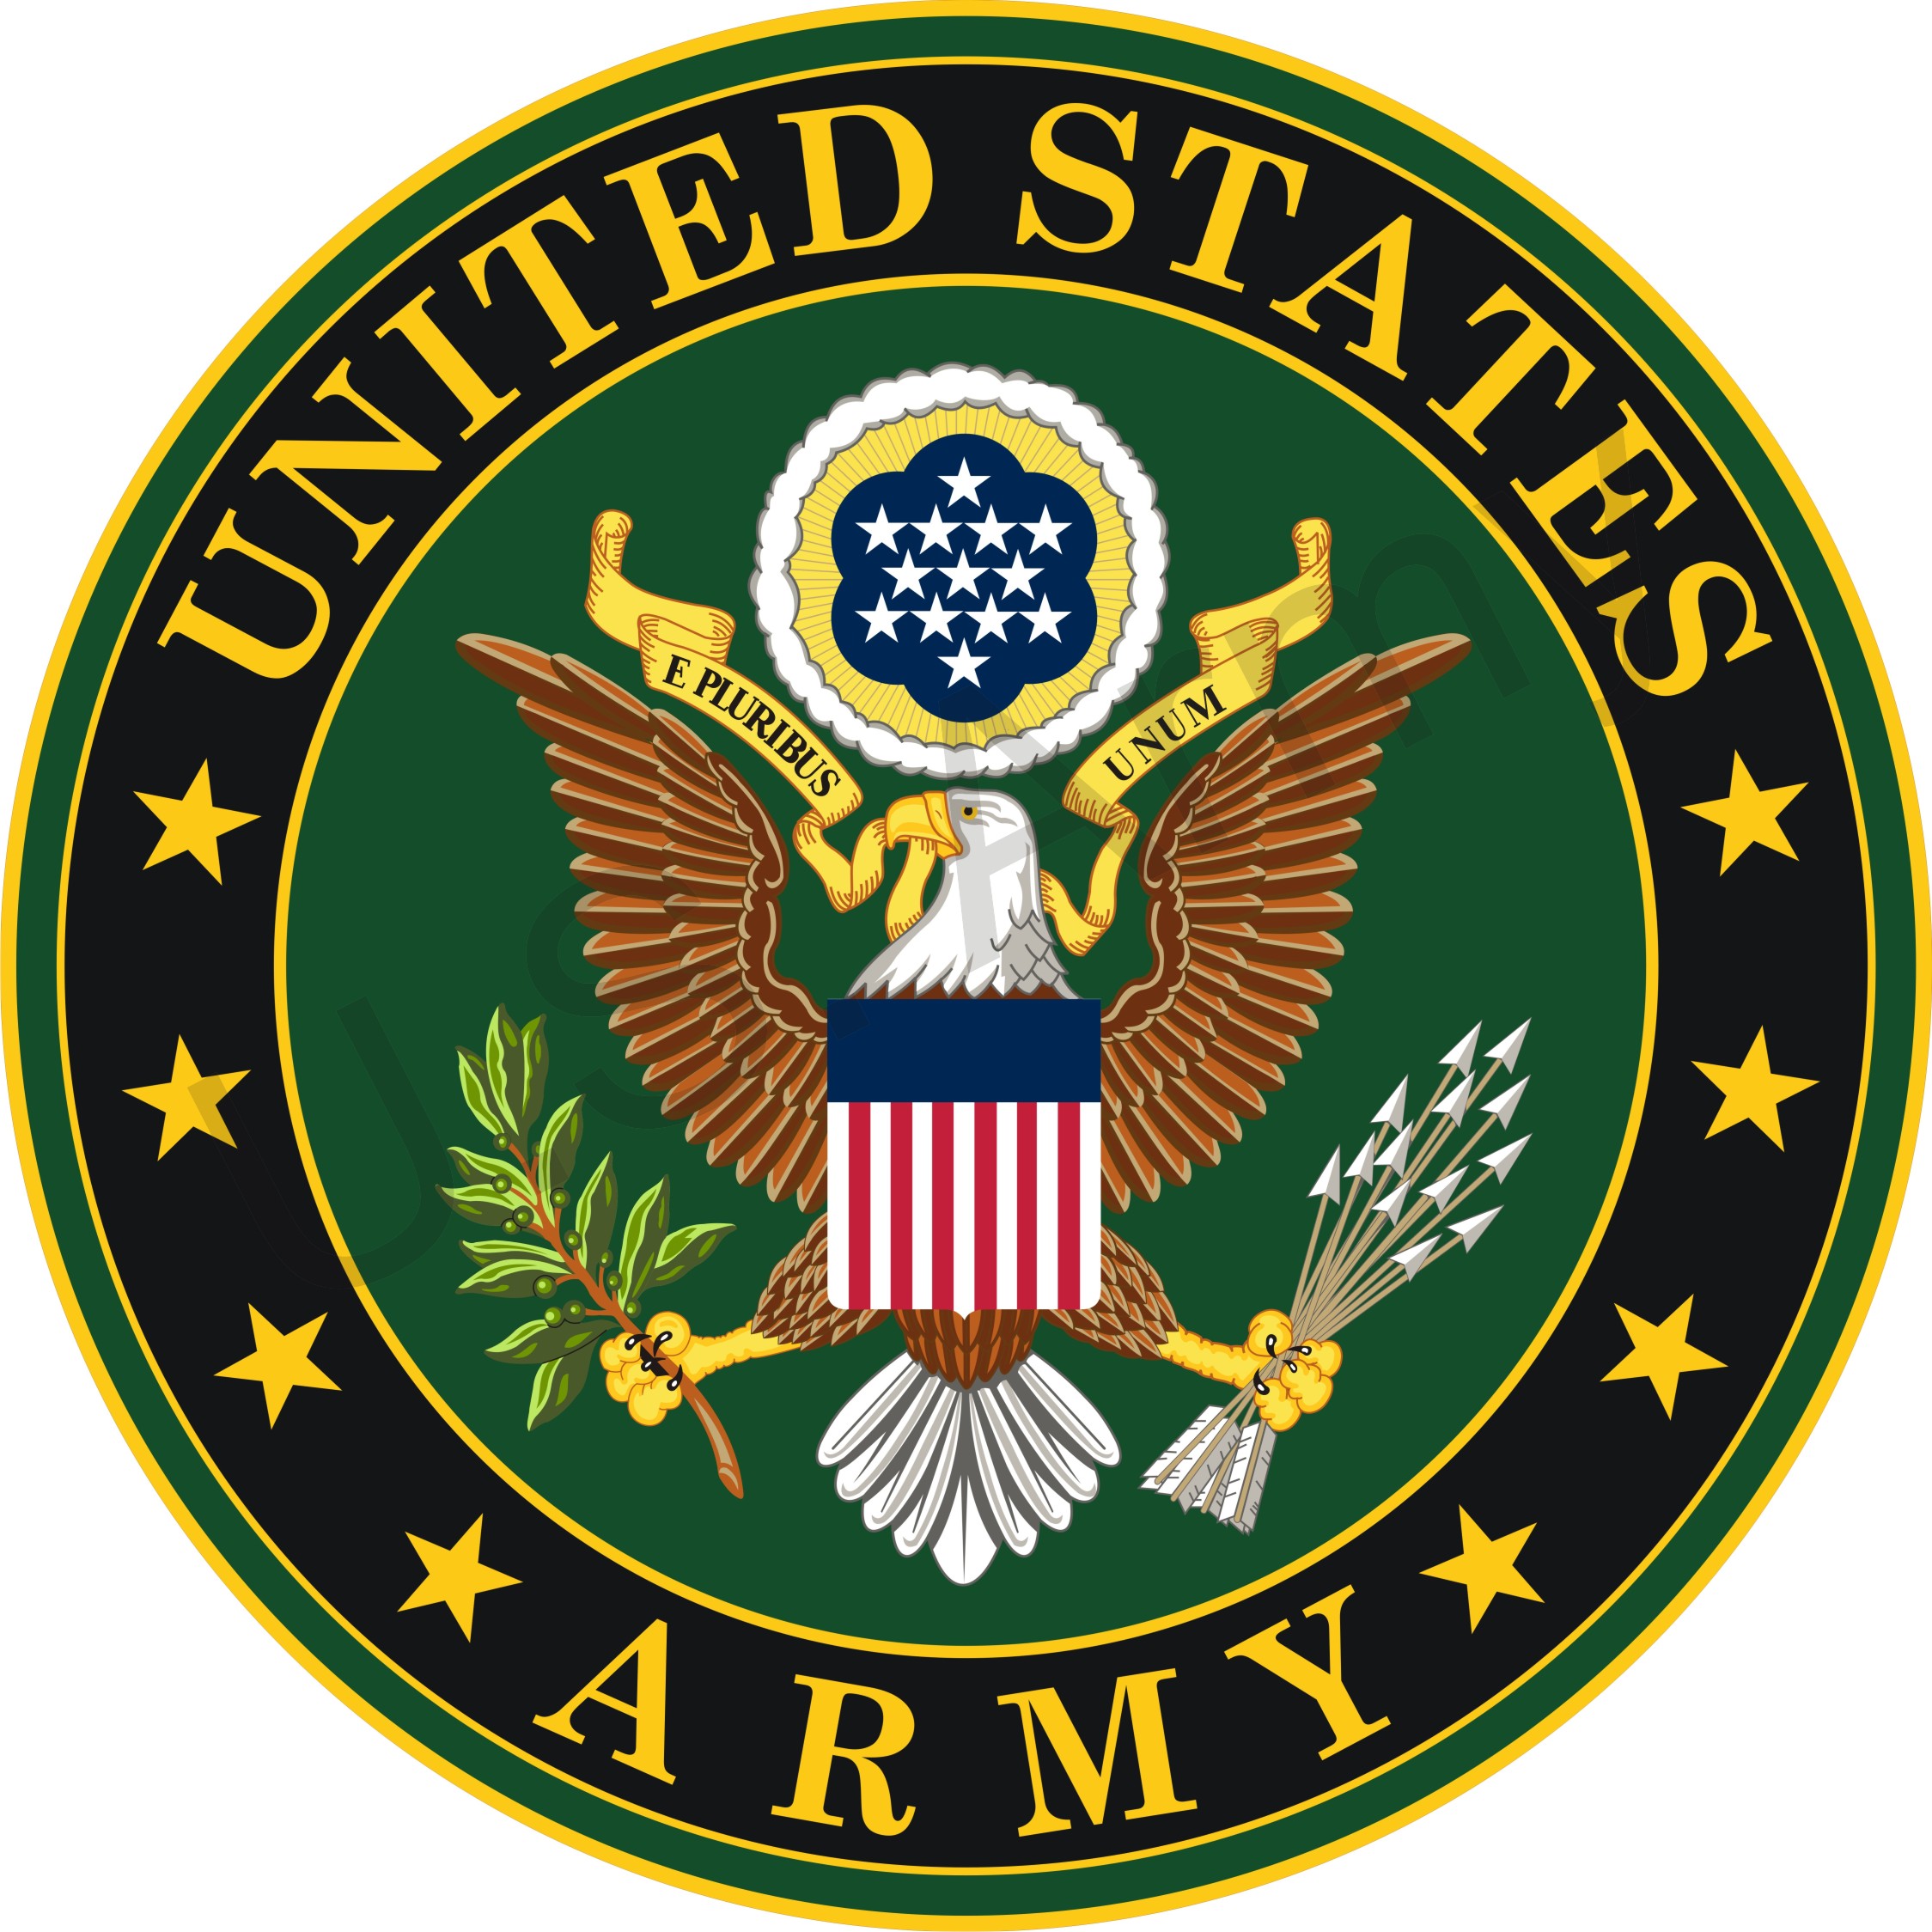 Us Army Icon Free - Social Media  Logos Icons in SVG and PNG 